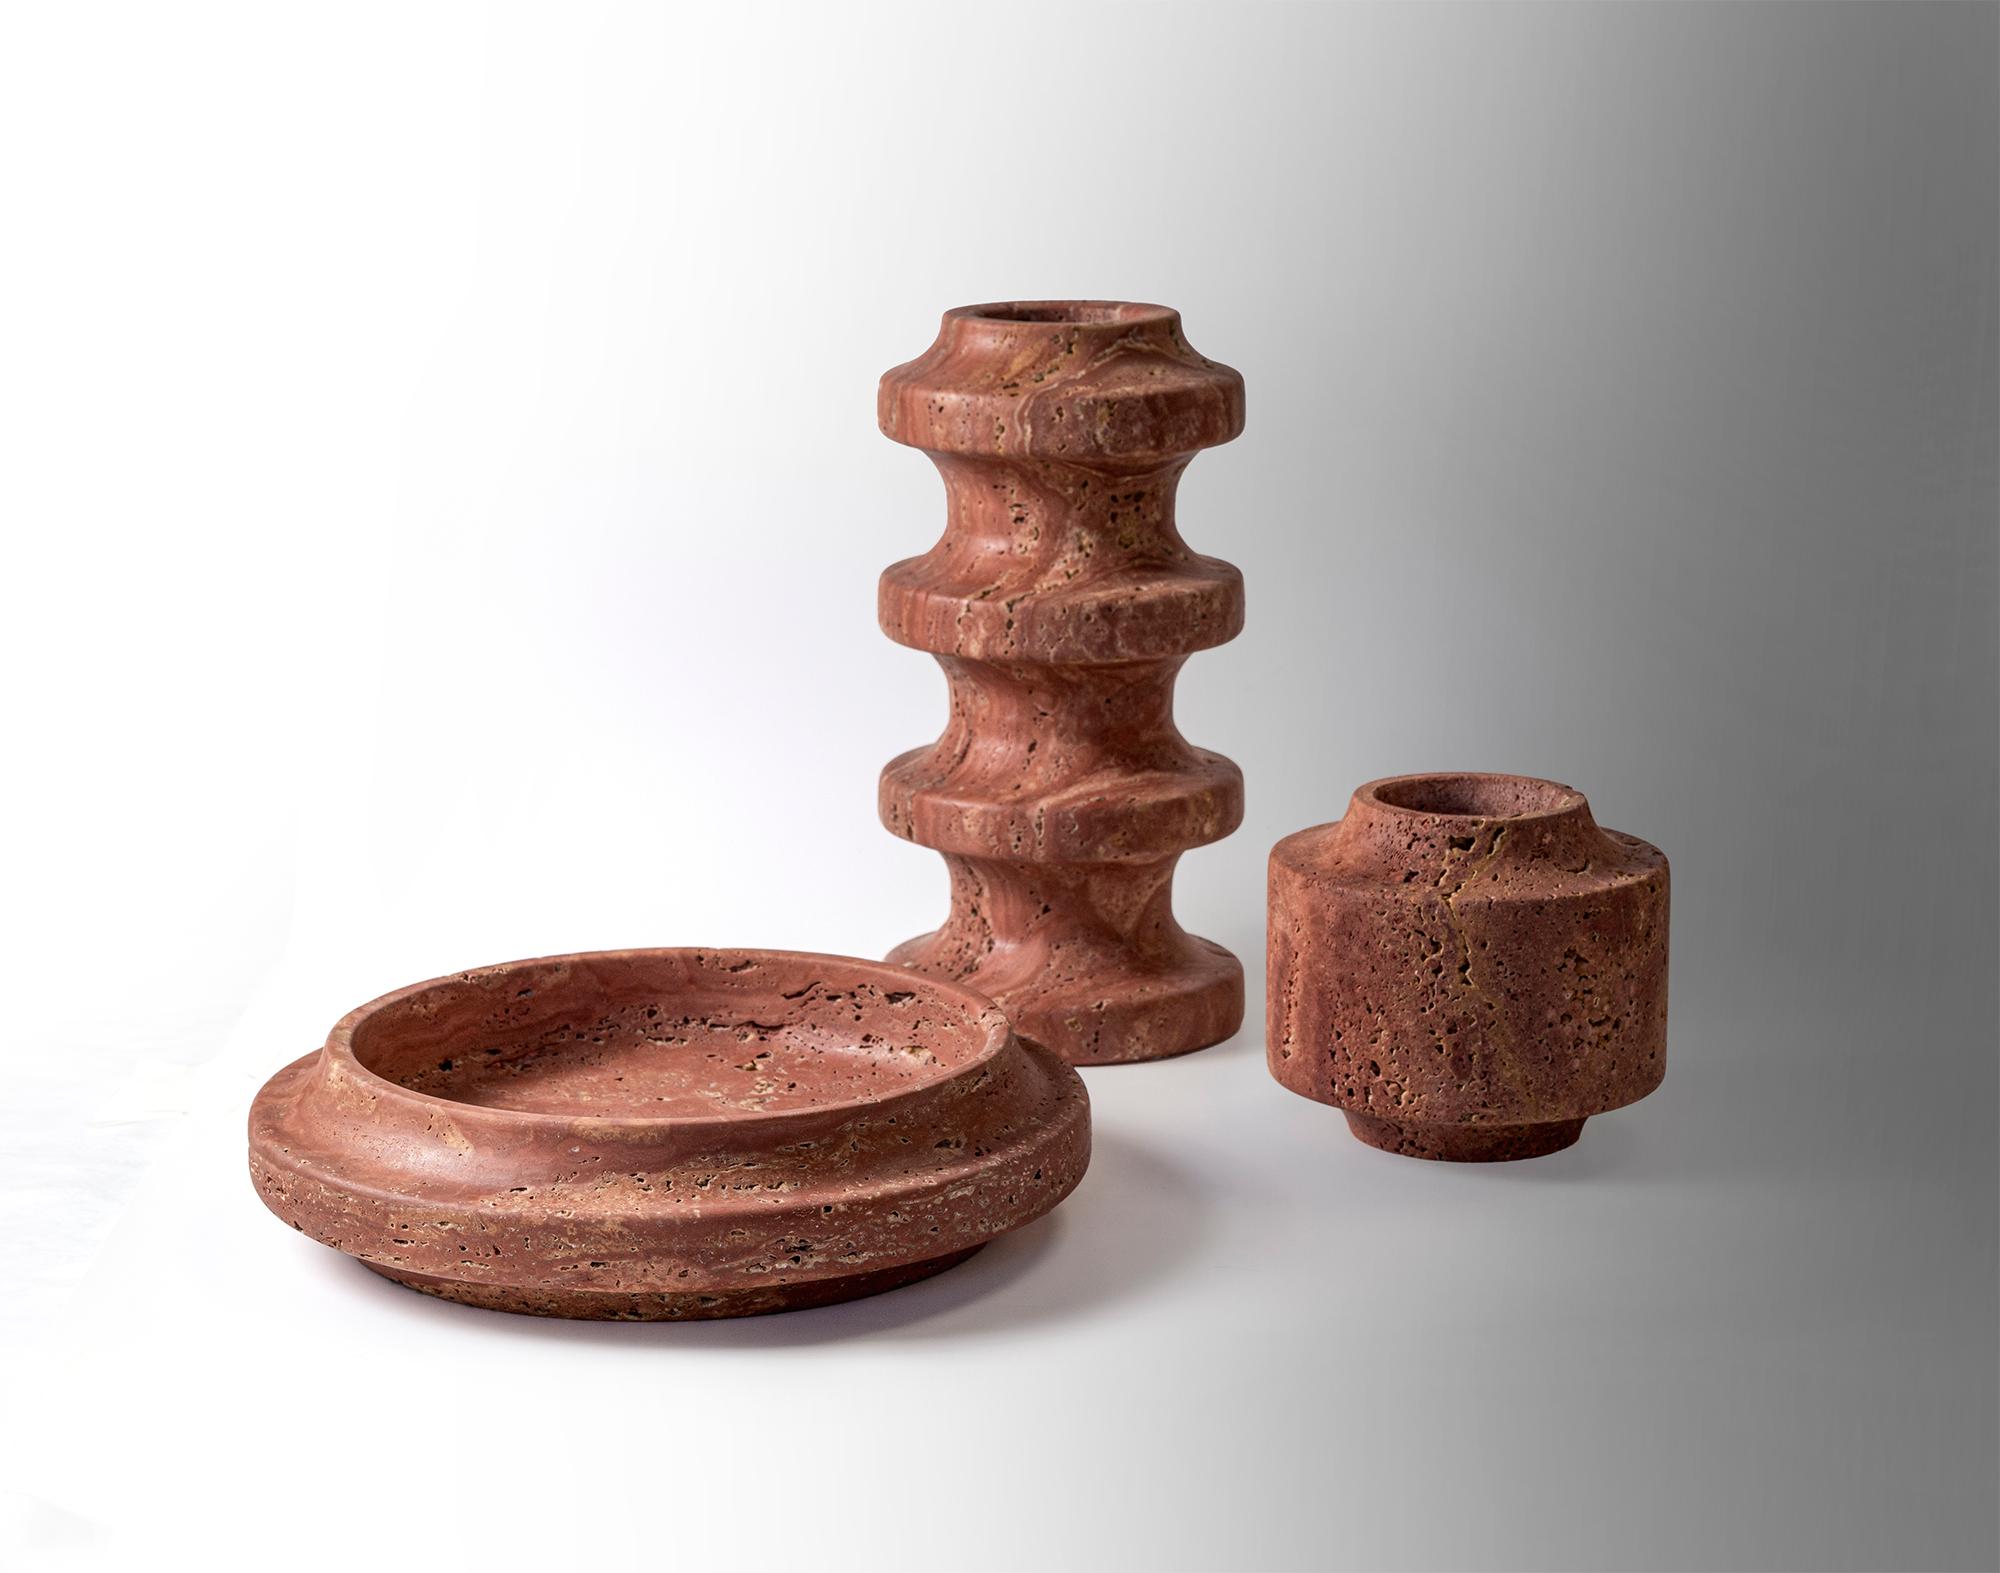 Set of 3 Red Travertine High Vase, Bowl and Pot by Etamorph
Dimensions: High Vase: Ø 13.5 x H 27 cm.
Pot: Ø 13 x H 12 cm.
Bowl: : Ø 27.5 x H 6.5 cm.
Materials: Red Travertine.

Available in different stone options. Please contact us. 

ETAMORPH is a